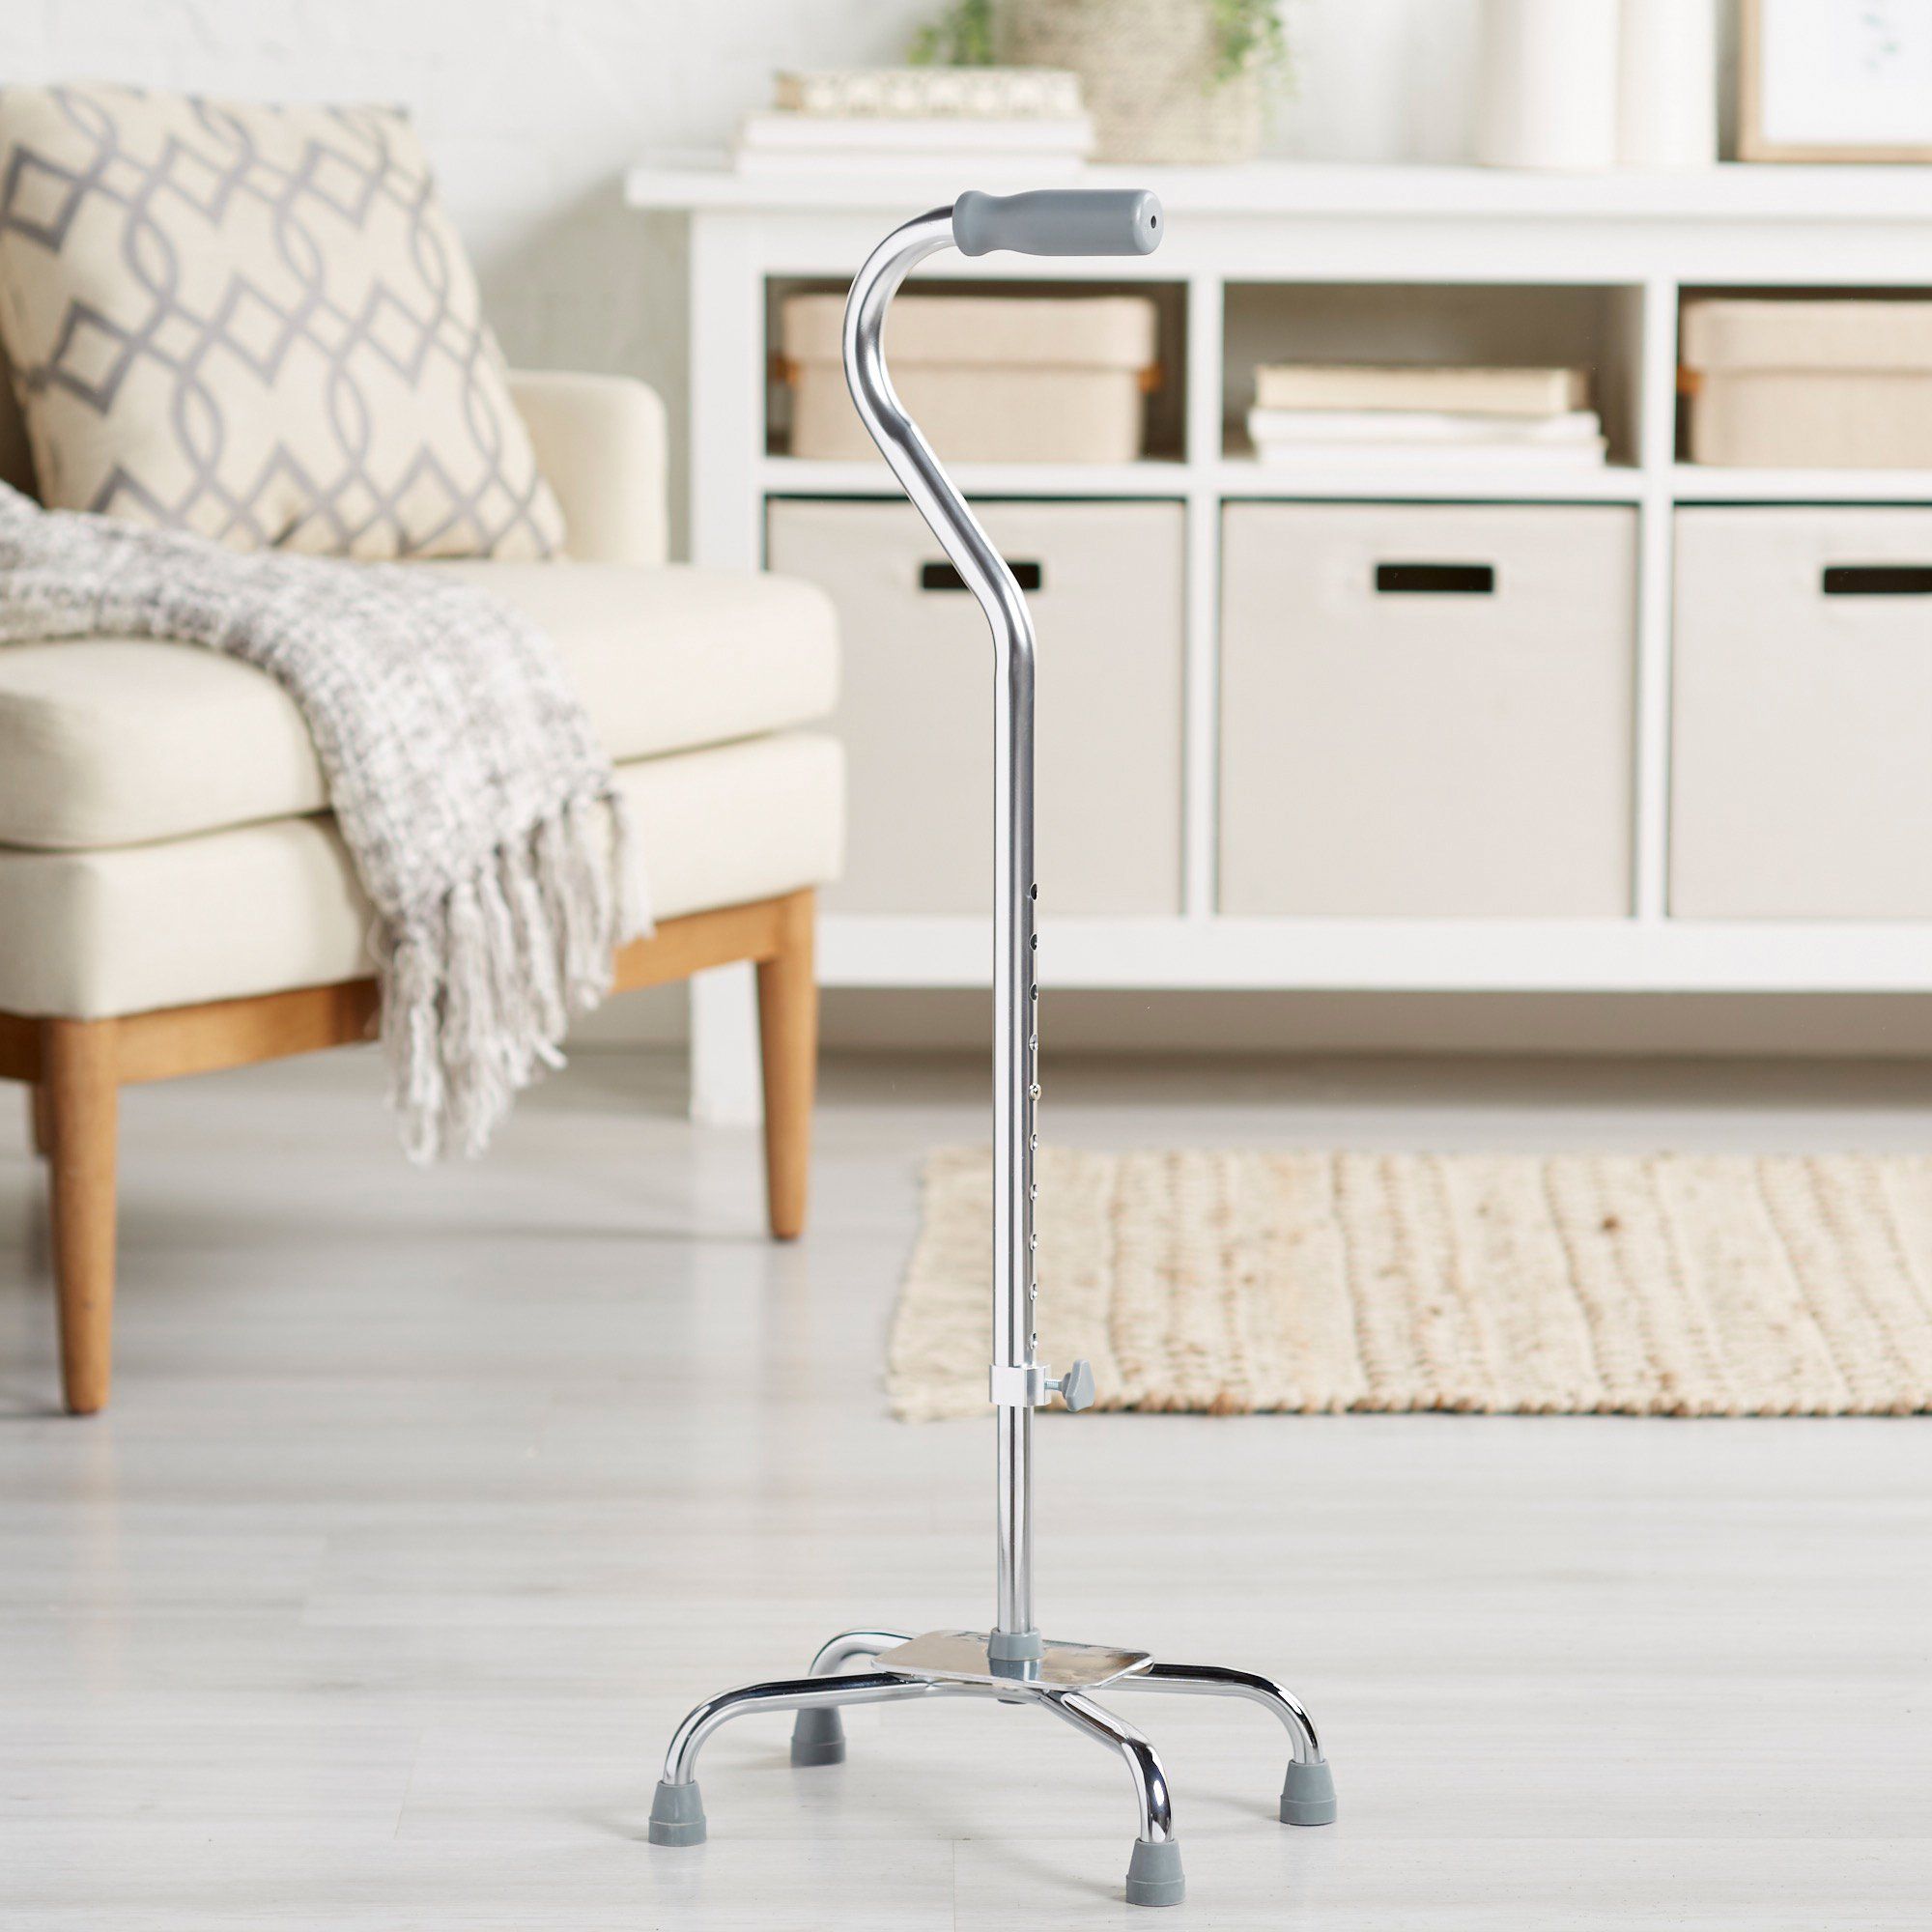 McKesson Chrome Steel Large Base Quad Cane, Adjustable Height 29" - 37.5" - 300 lb Weight Capacity